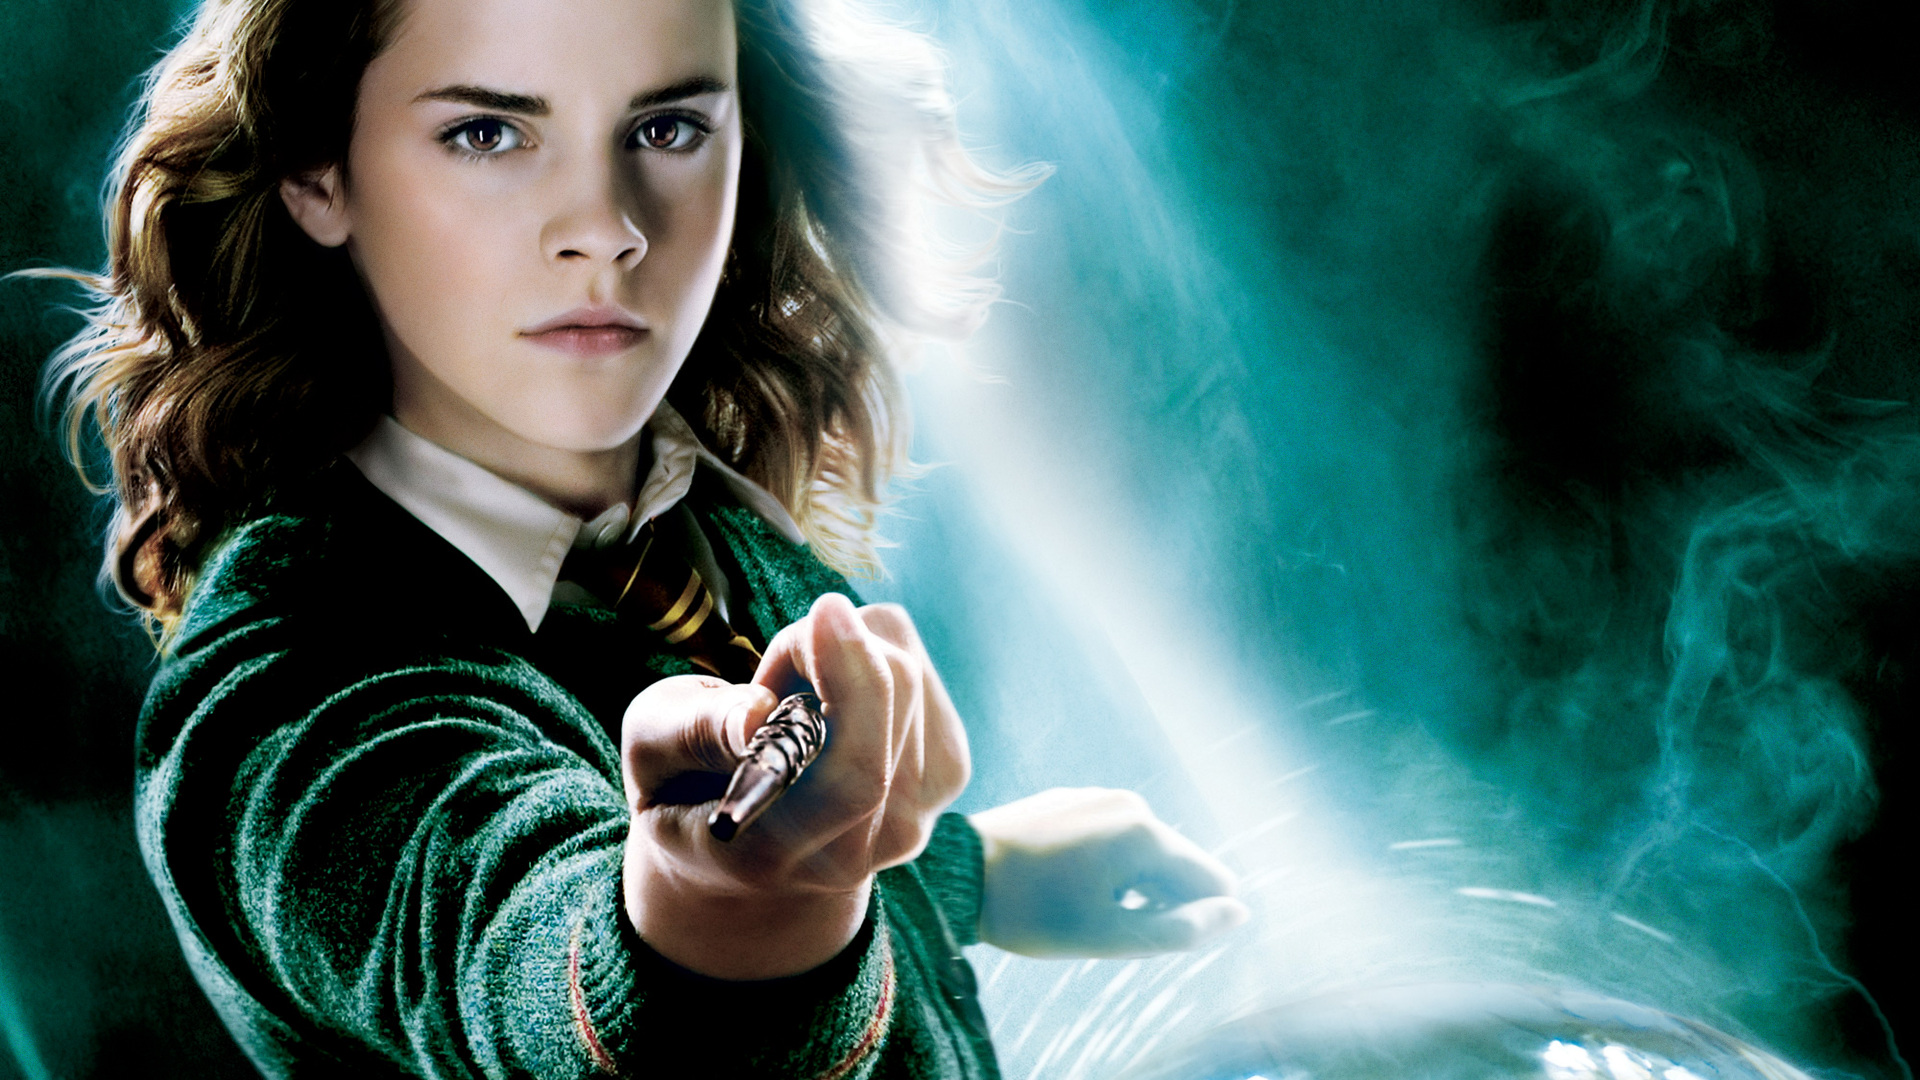 Movie Harry Potter and the Order of the Phoenix HD Wallpaper | Background Image